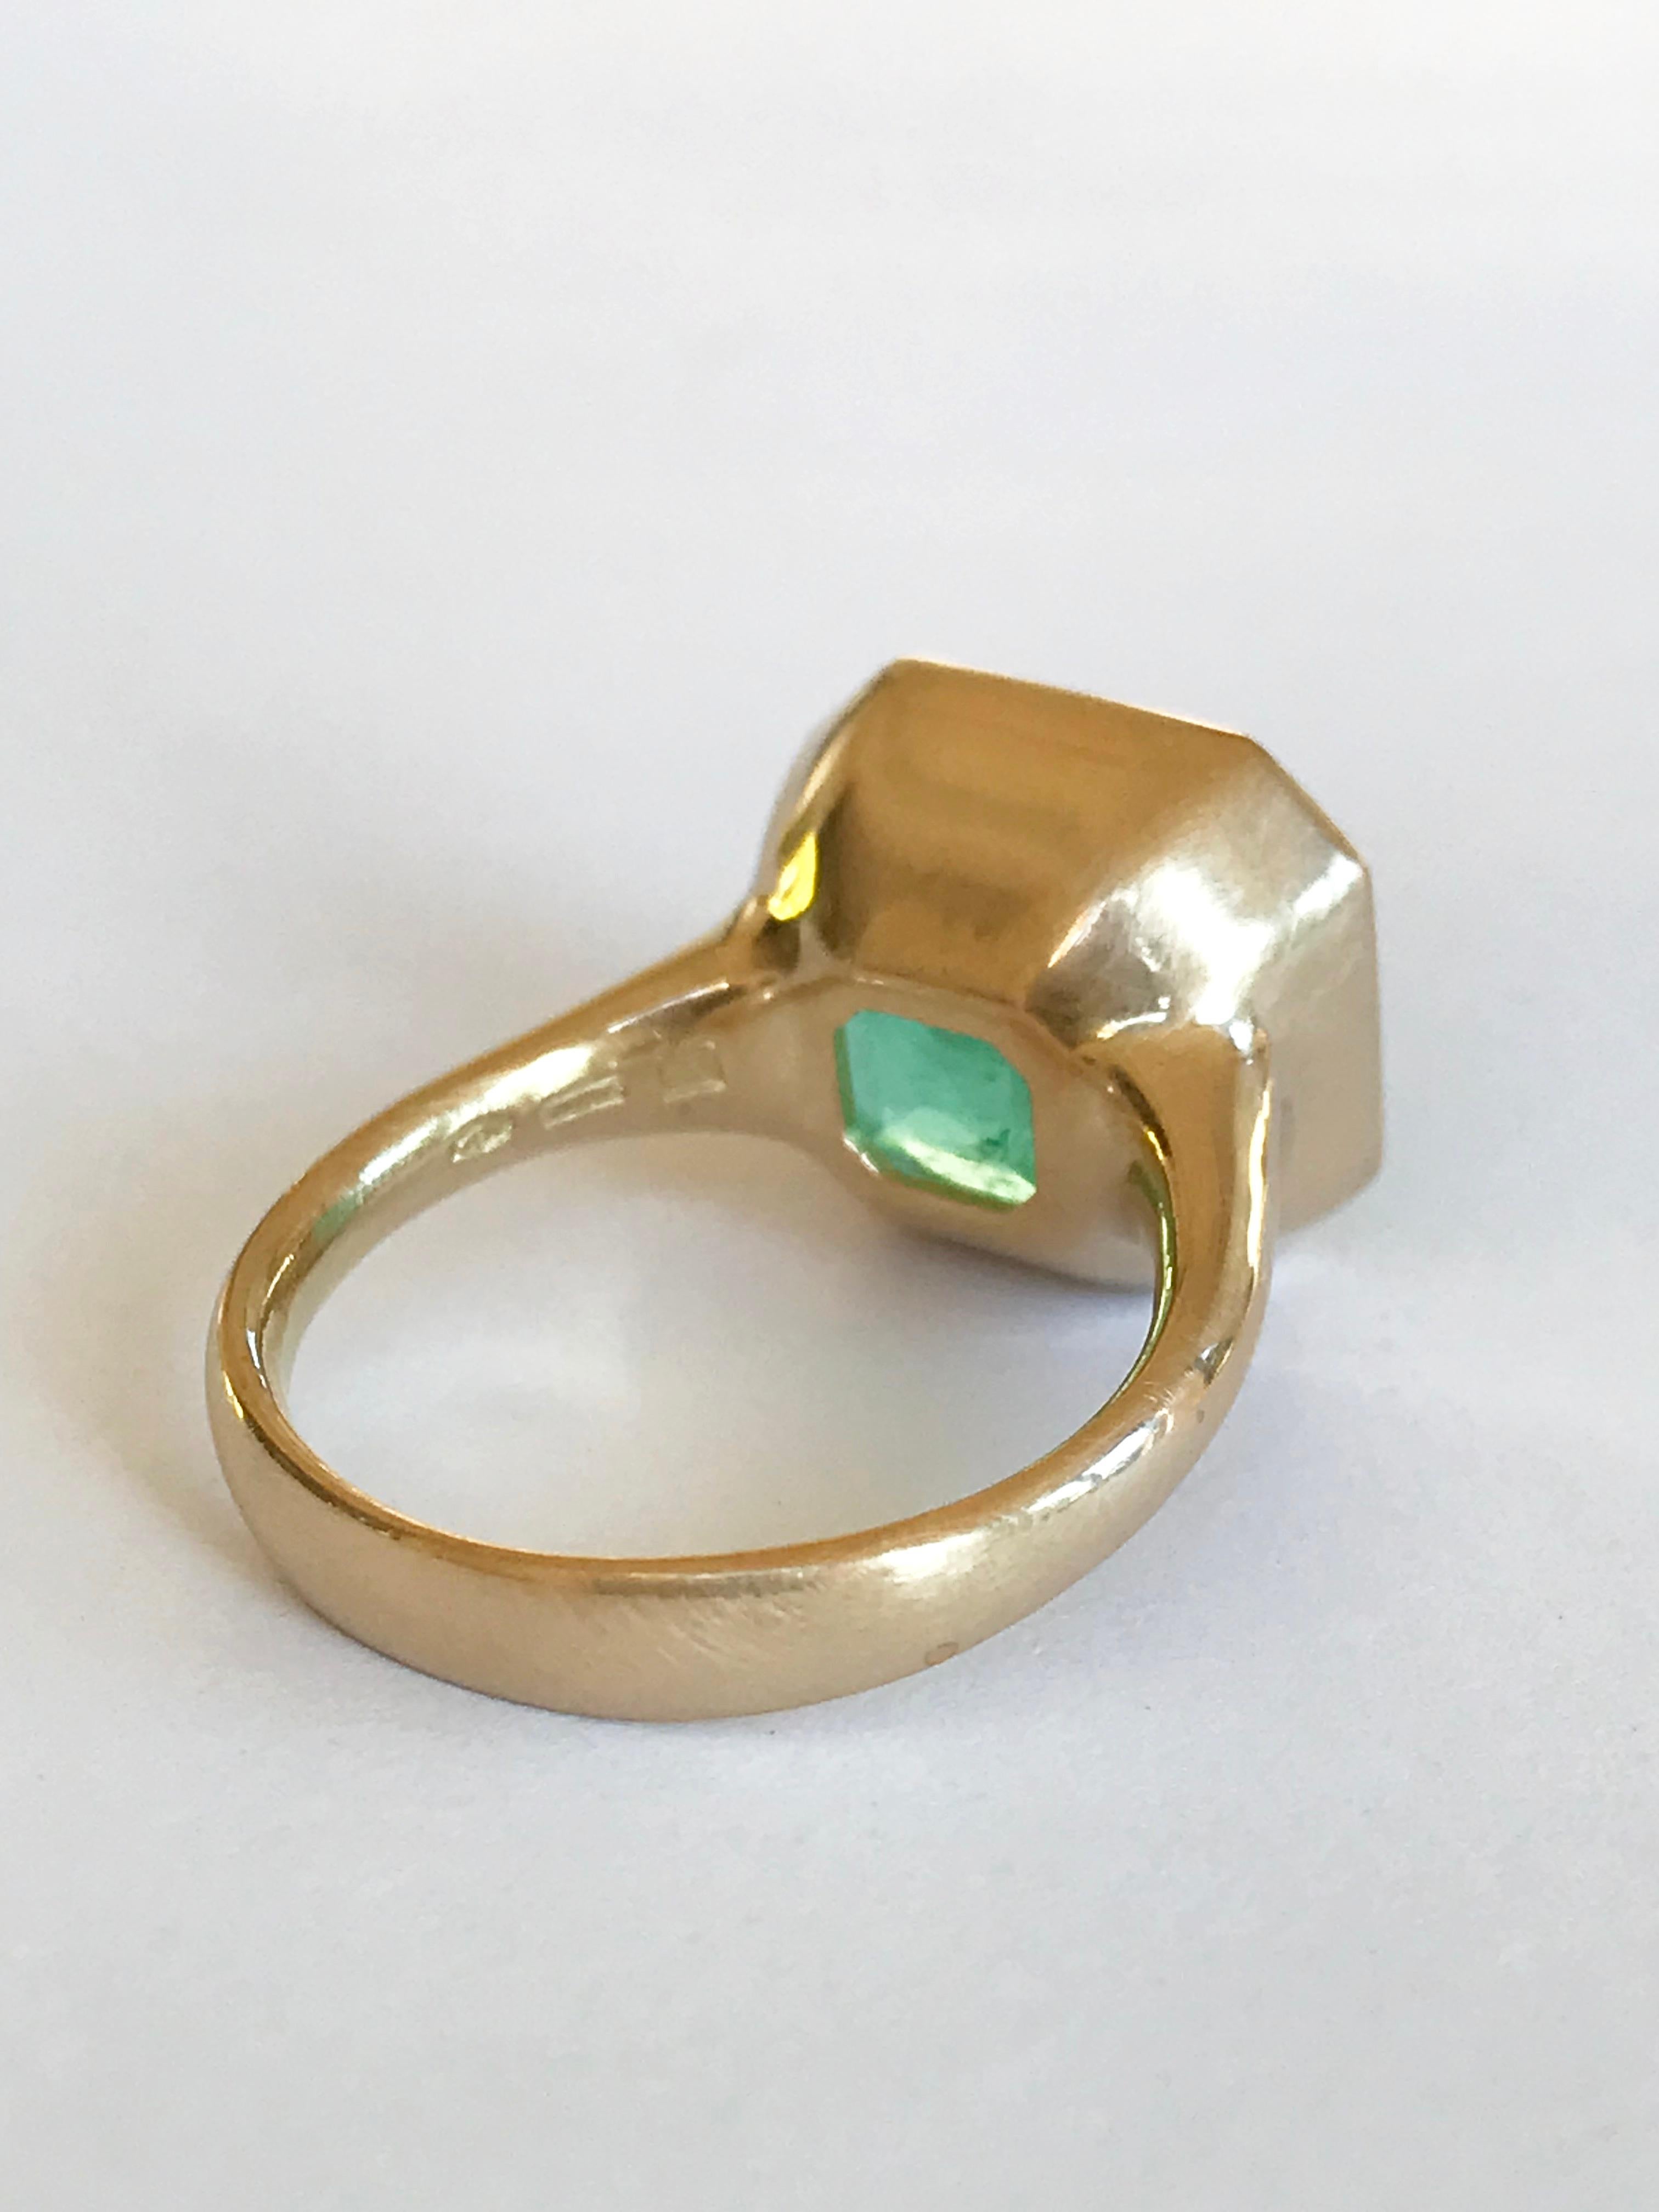 Dalben Magnificent 9, 69 Carat Certified Colombian Emerald Yellow Gold Ring 1